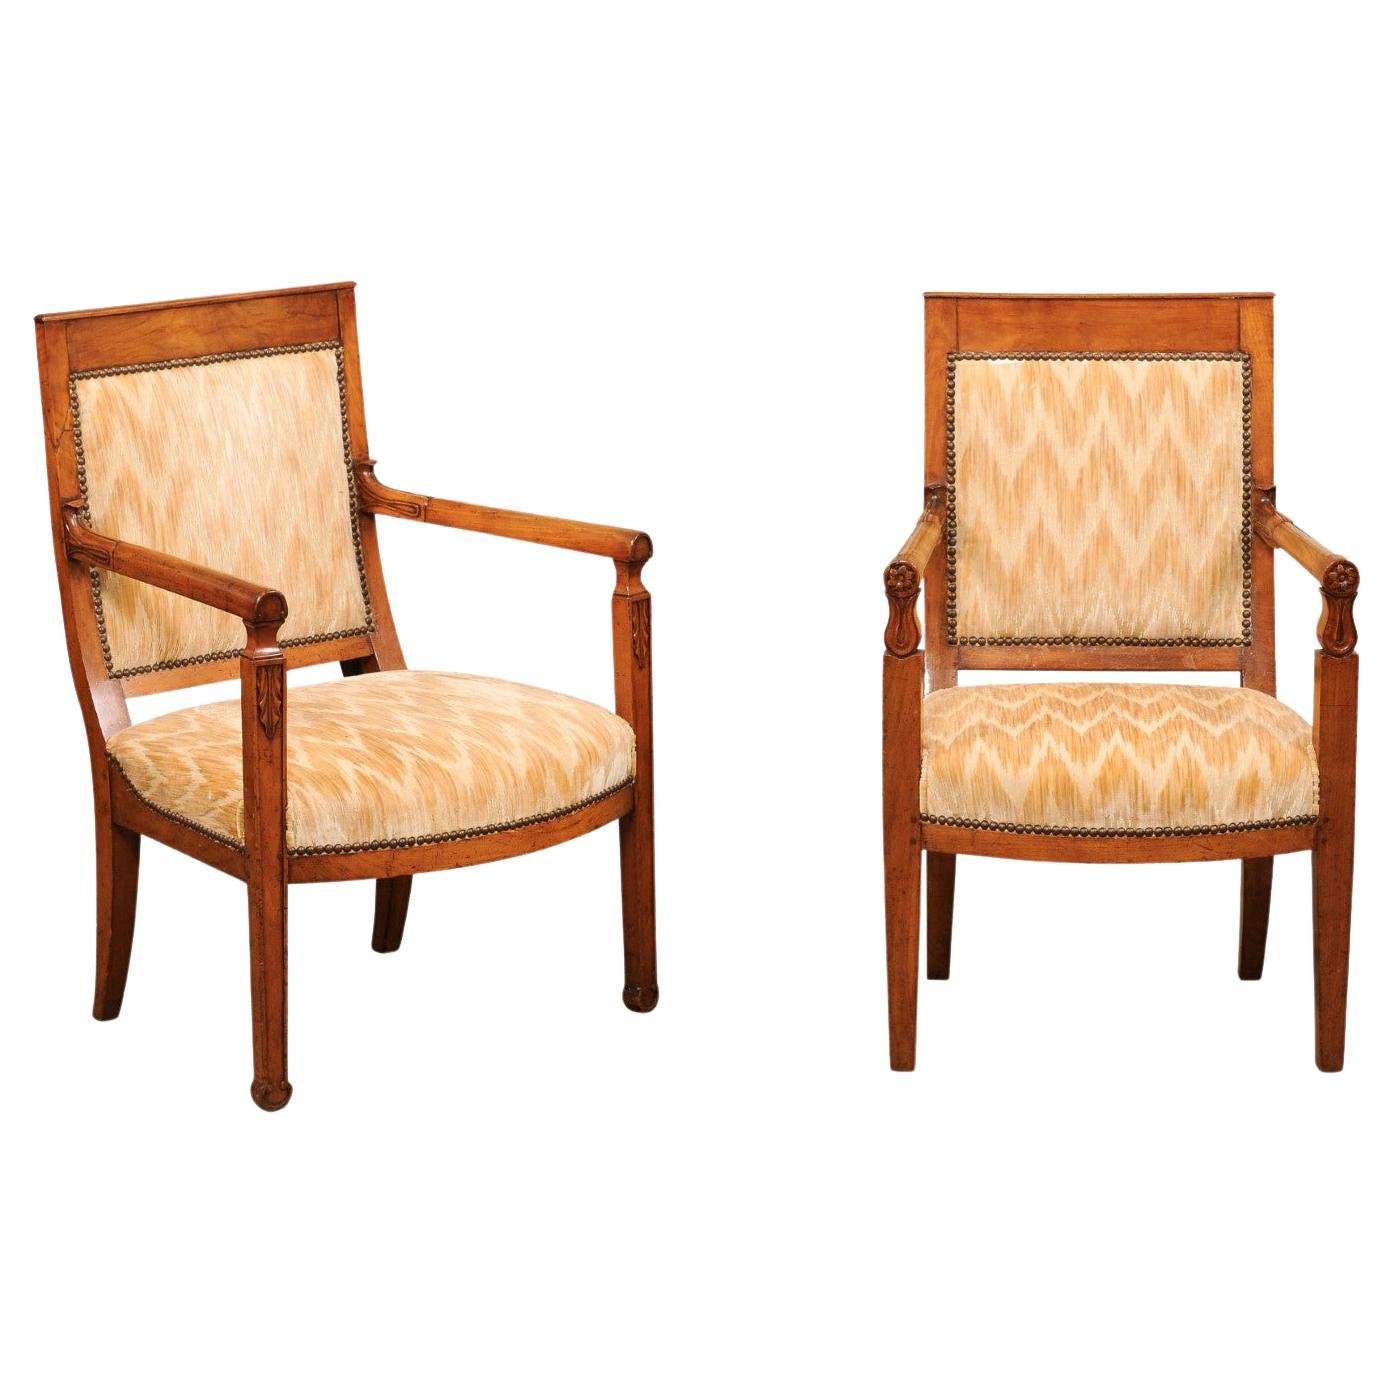 Matched Pair of Neoclassical Style Walnut Armchairs, 20th Century France For Sale